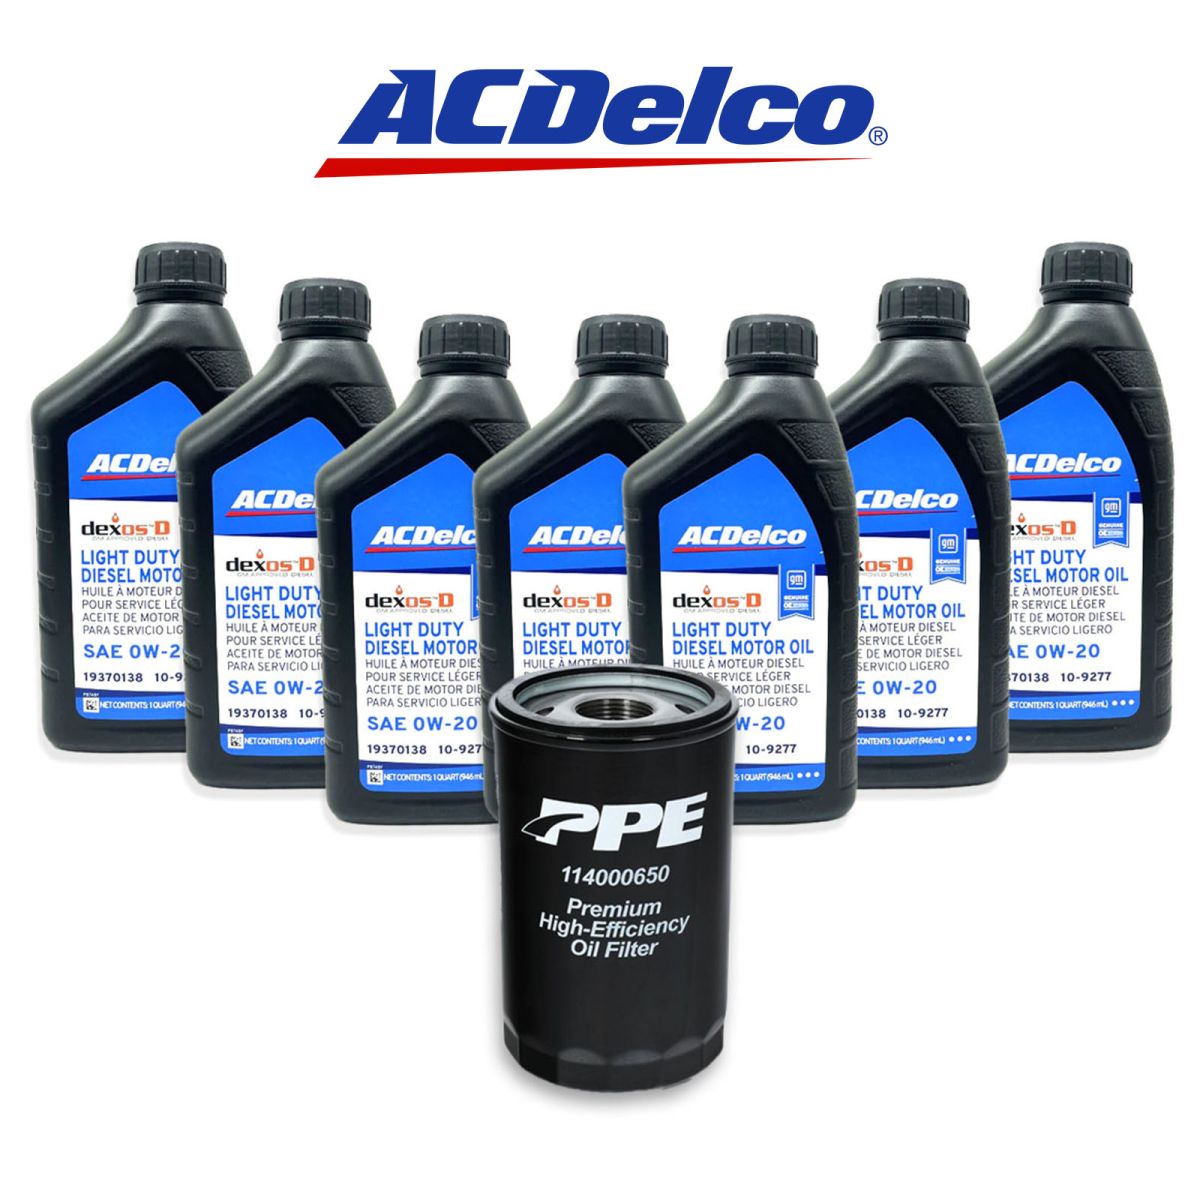 PPE - ACDelco 0W-20 Oil Change Kit PPE Filter For 2021+ Chevy Silverado/Suburban/Tahoe 3.0L Duramax